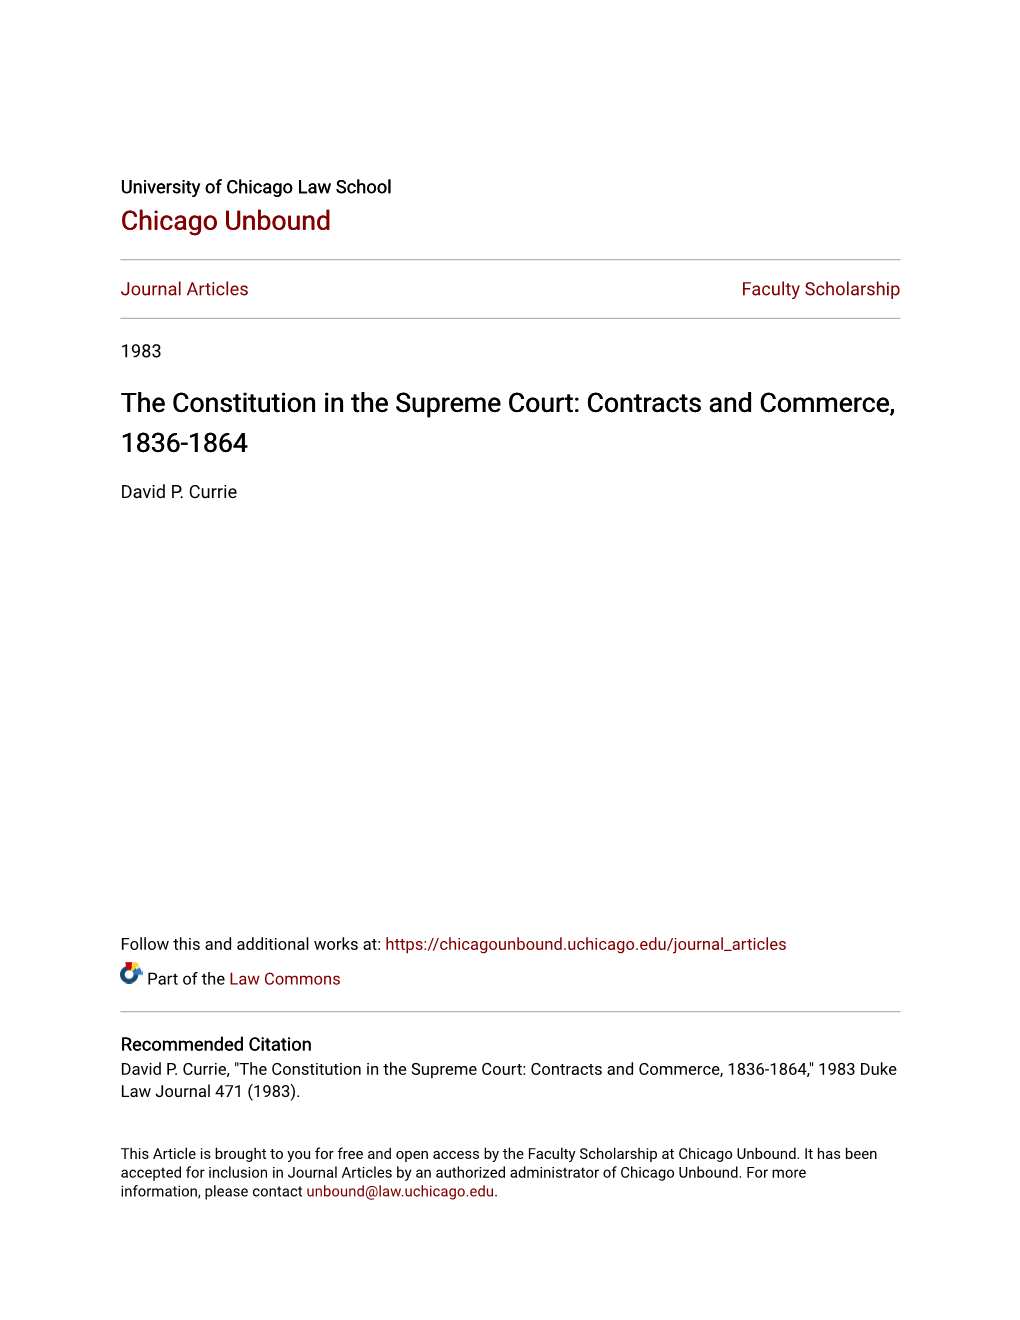 The Constitution in the Supreme Court: Contracts and Commerce, 1836-1864